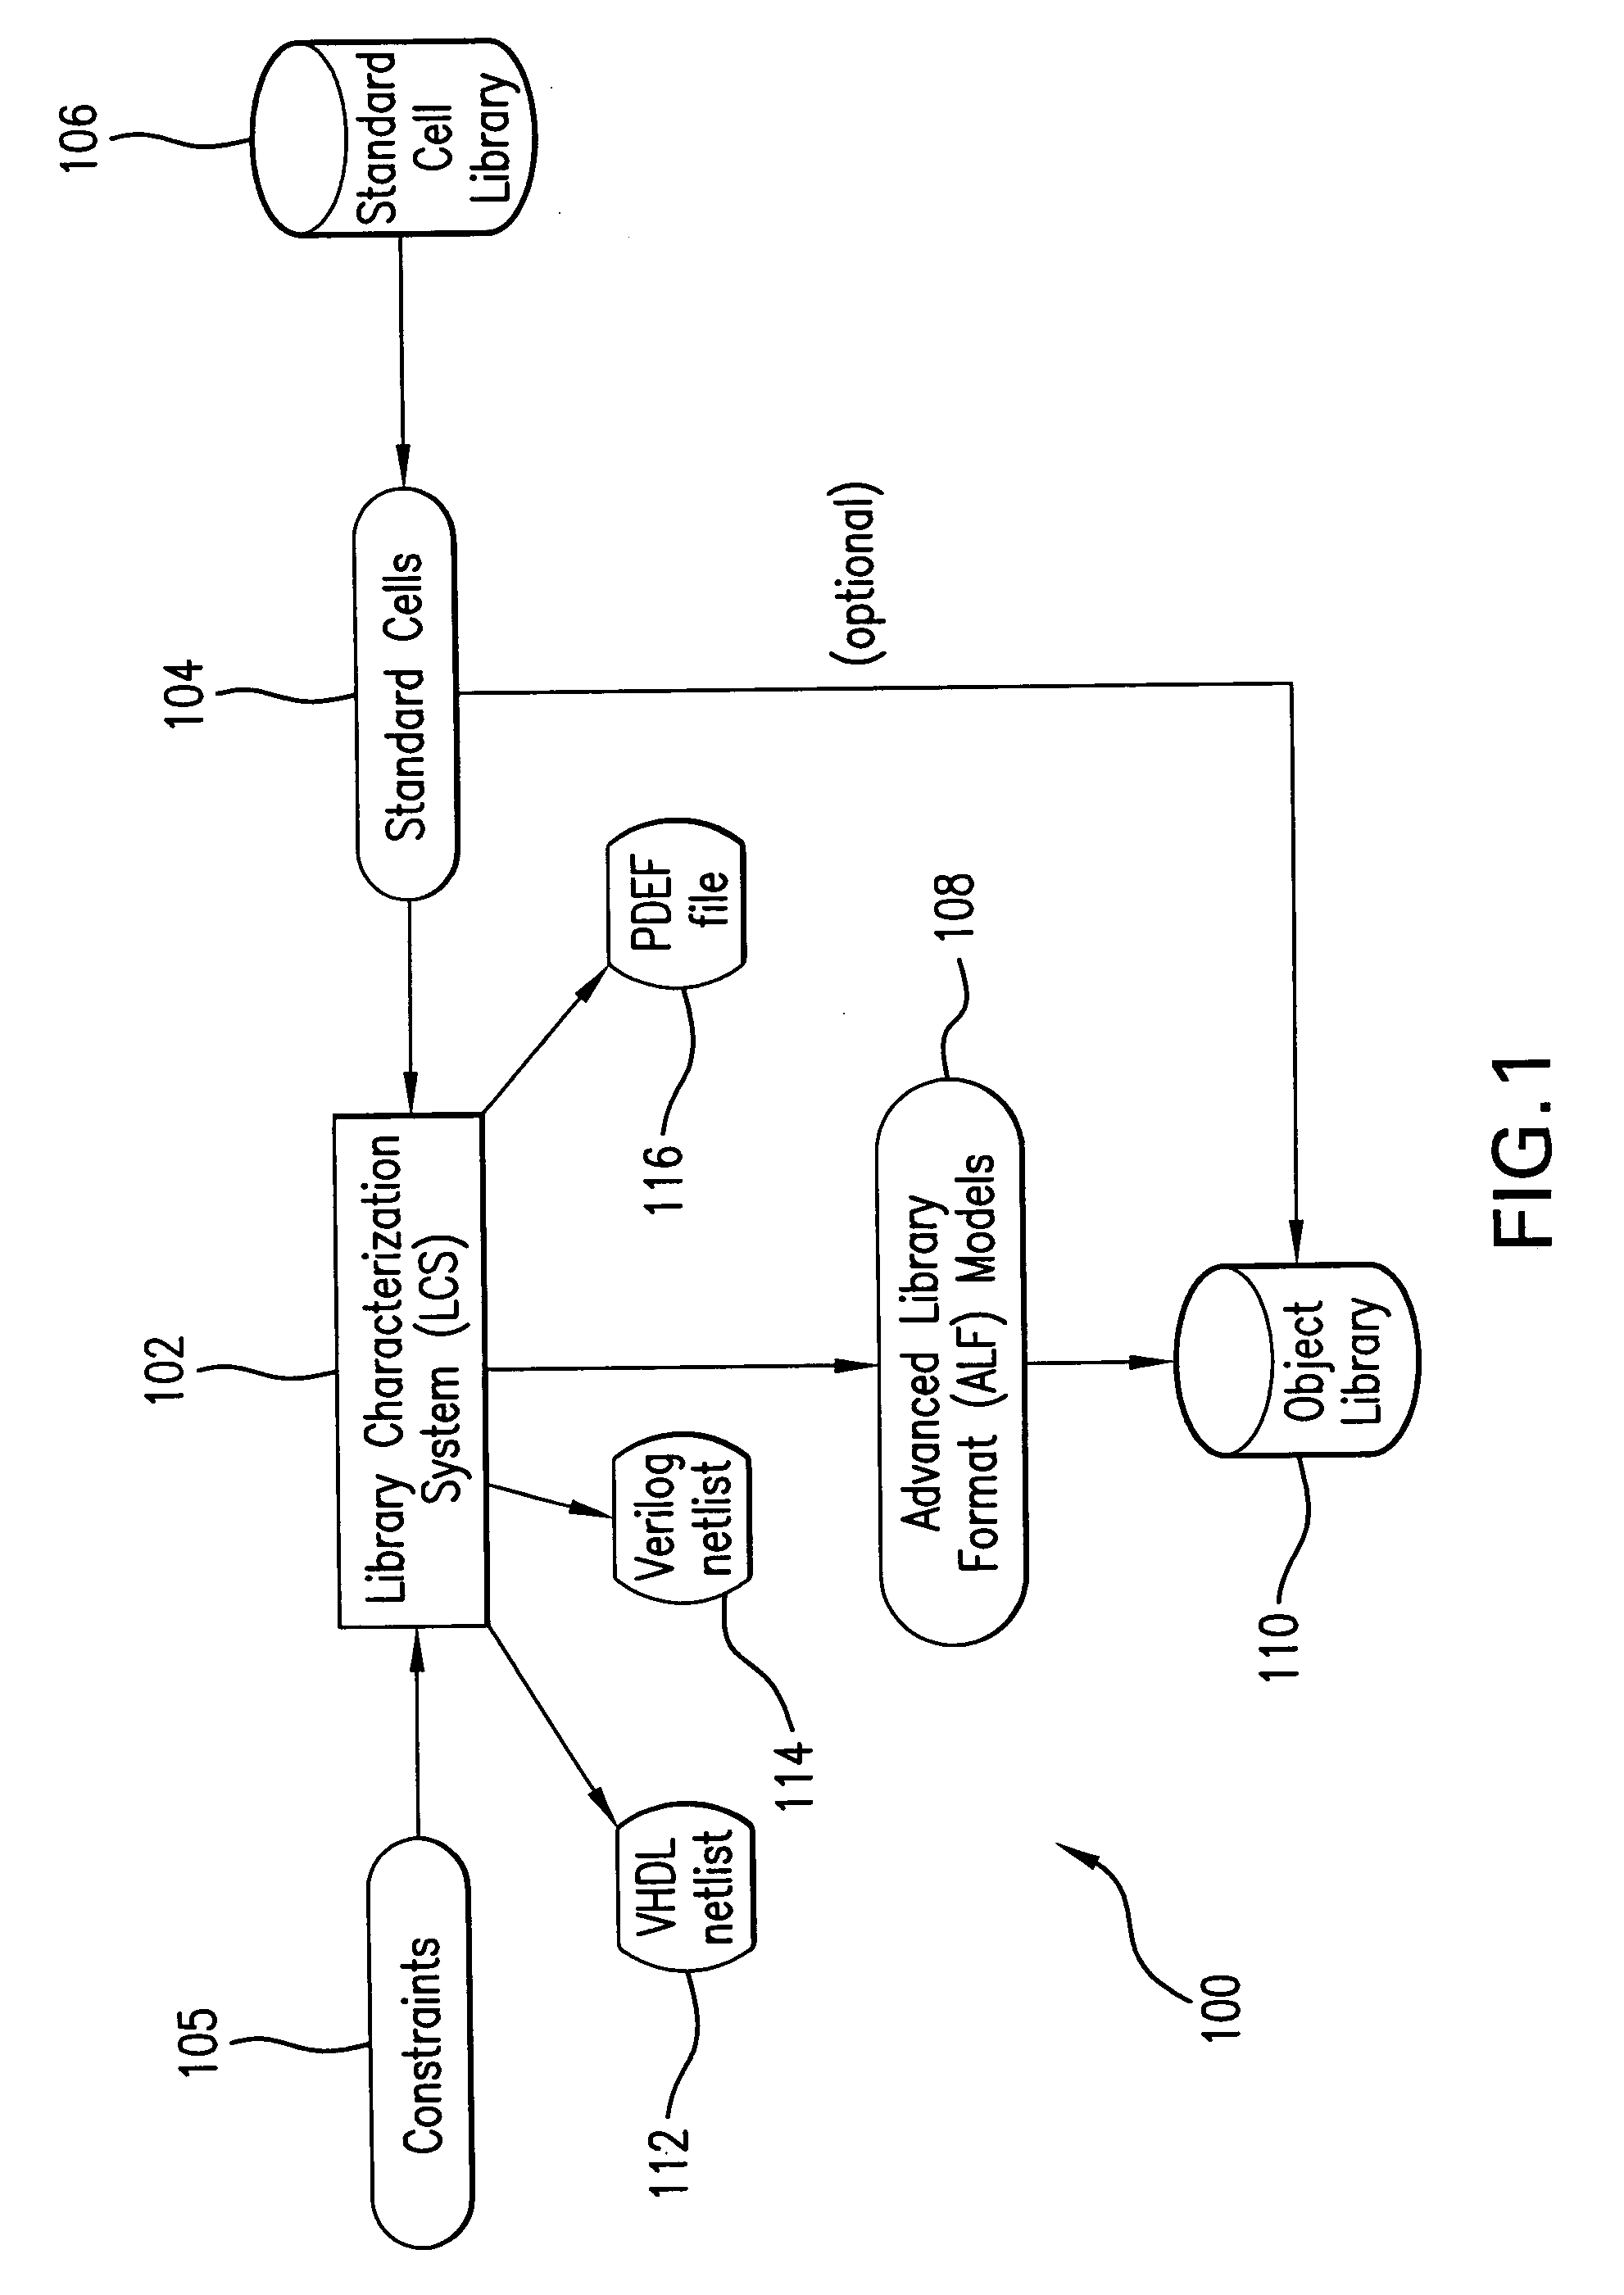 Methods and systems for structured ASIC electronic design automation